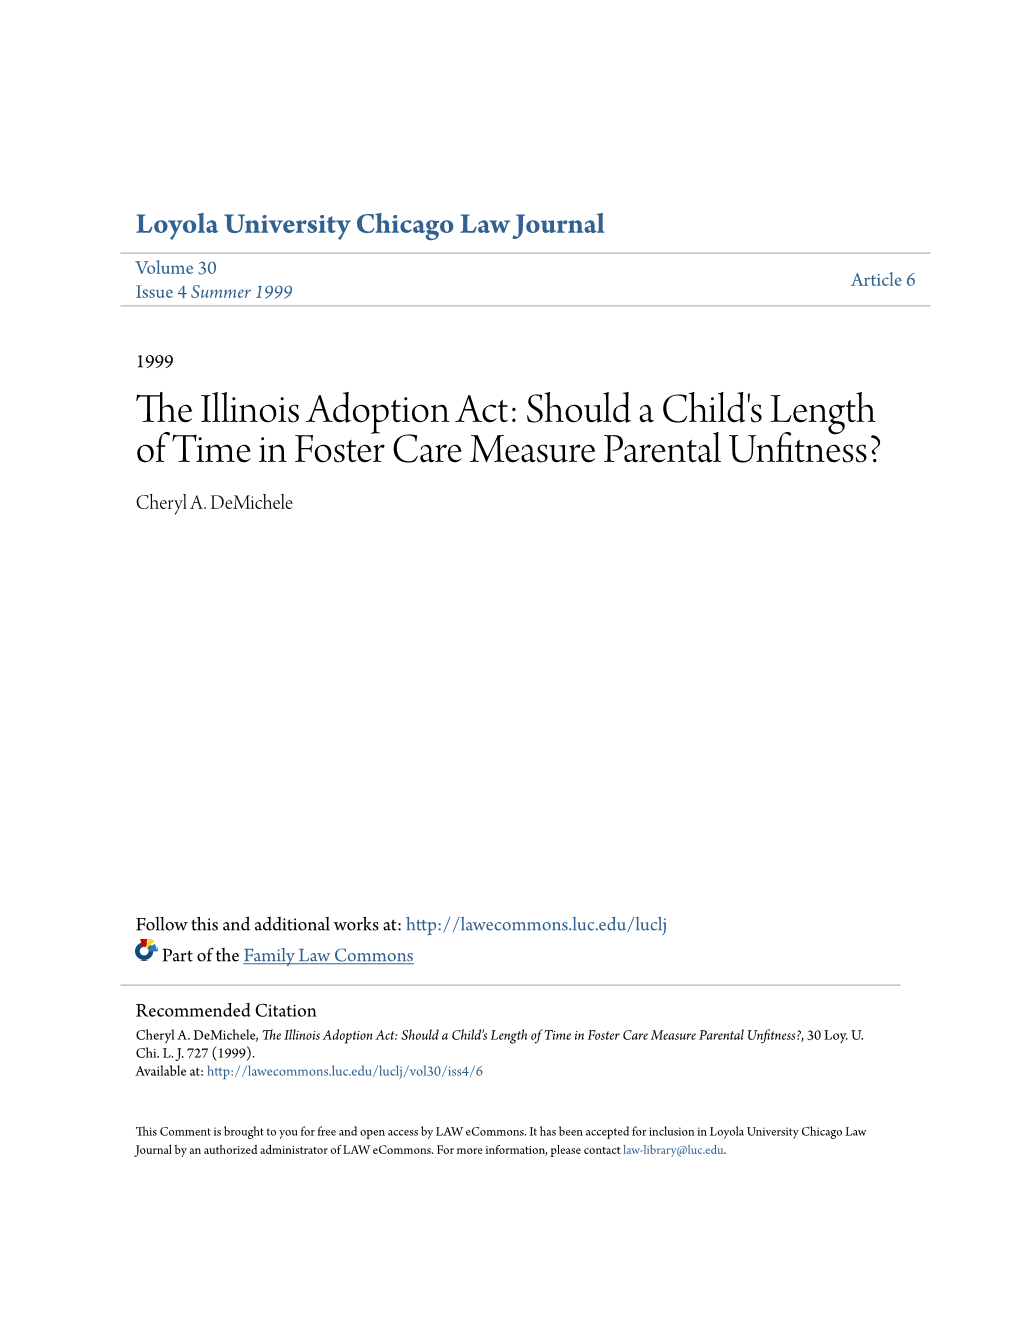 The Illinois Adoption Act: Should a Child's Length of Time in Foster Care Measure Parental Unfitness? Cheryl A